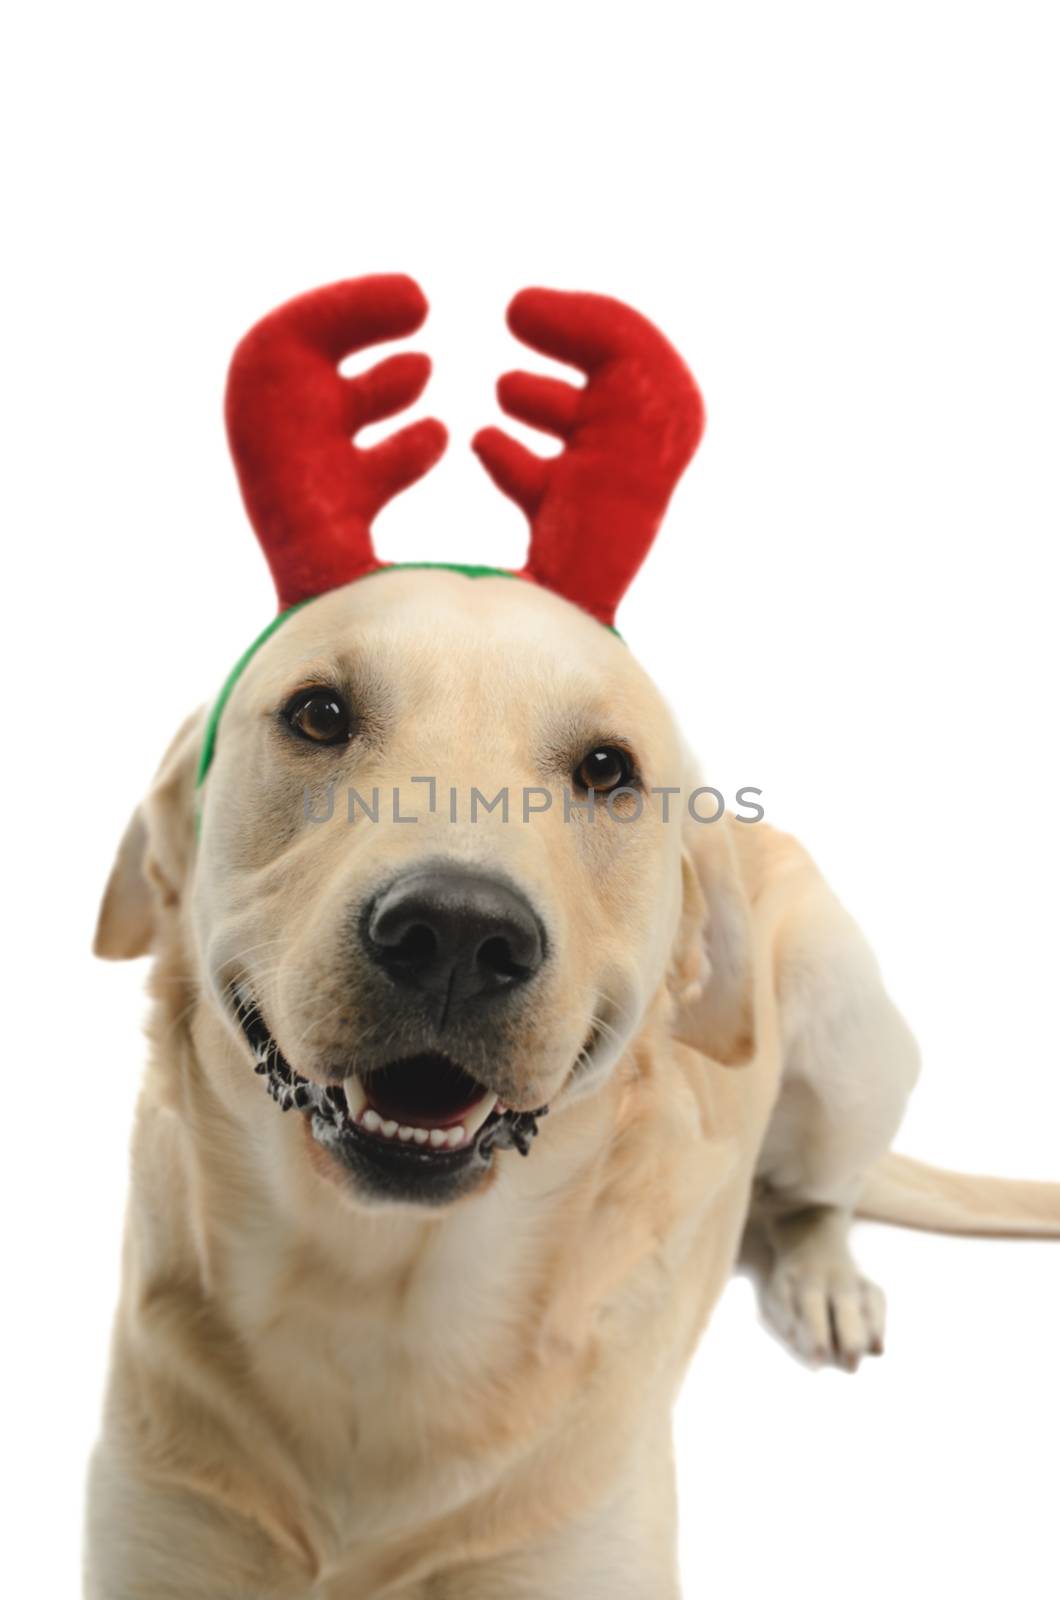 dog with reindeer antlers, costume, studio photoshoot in front of white background